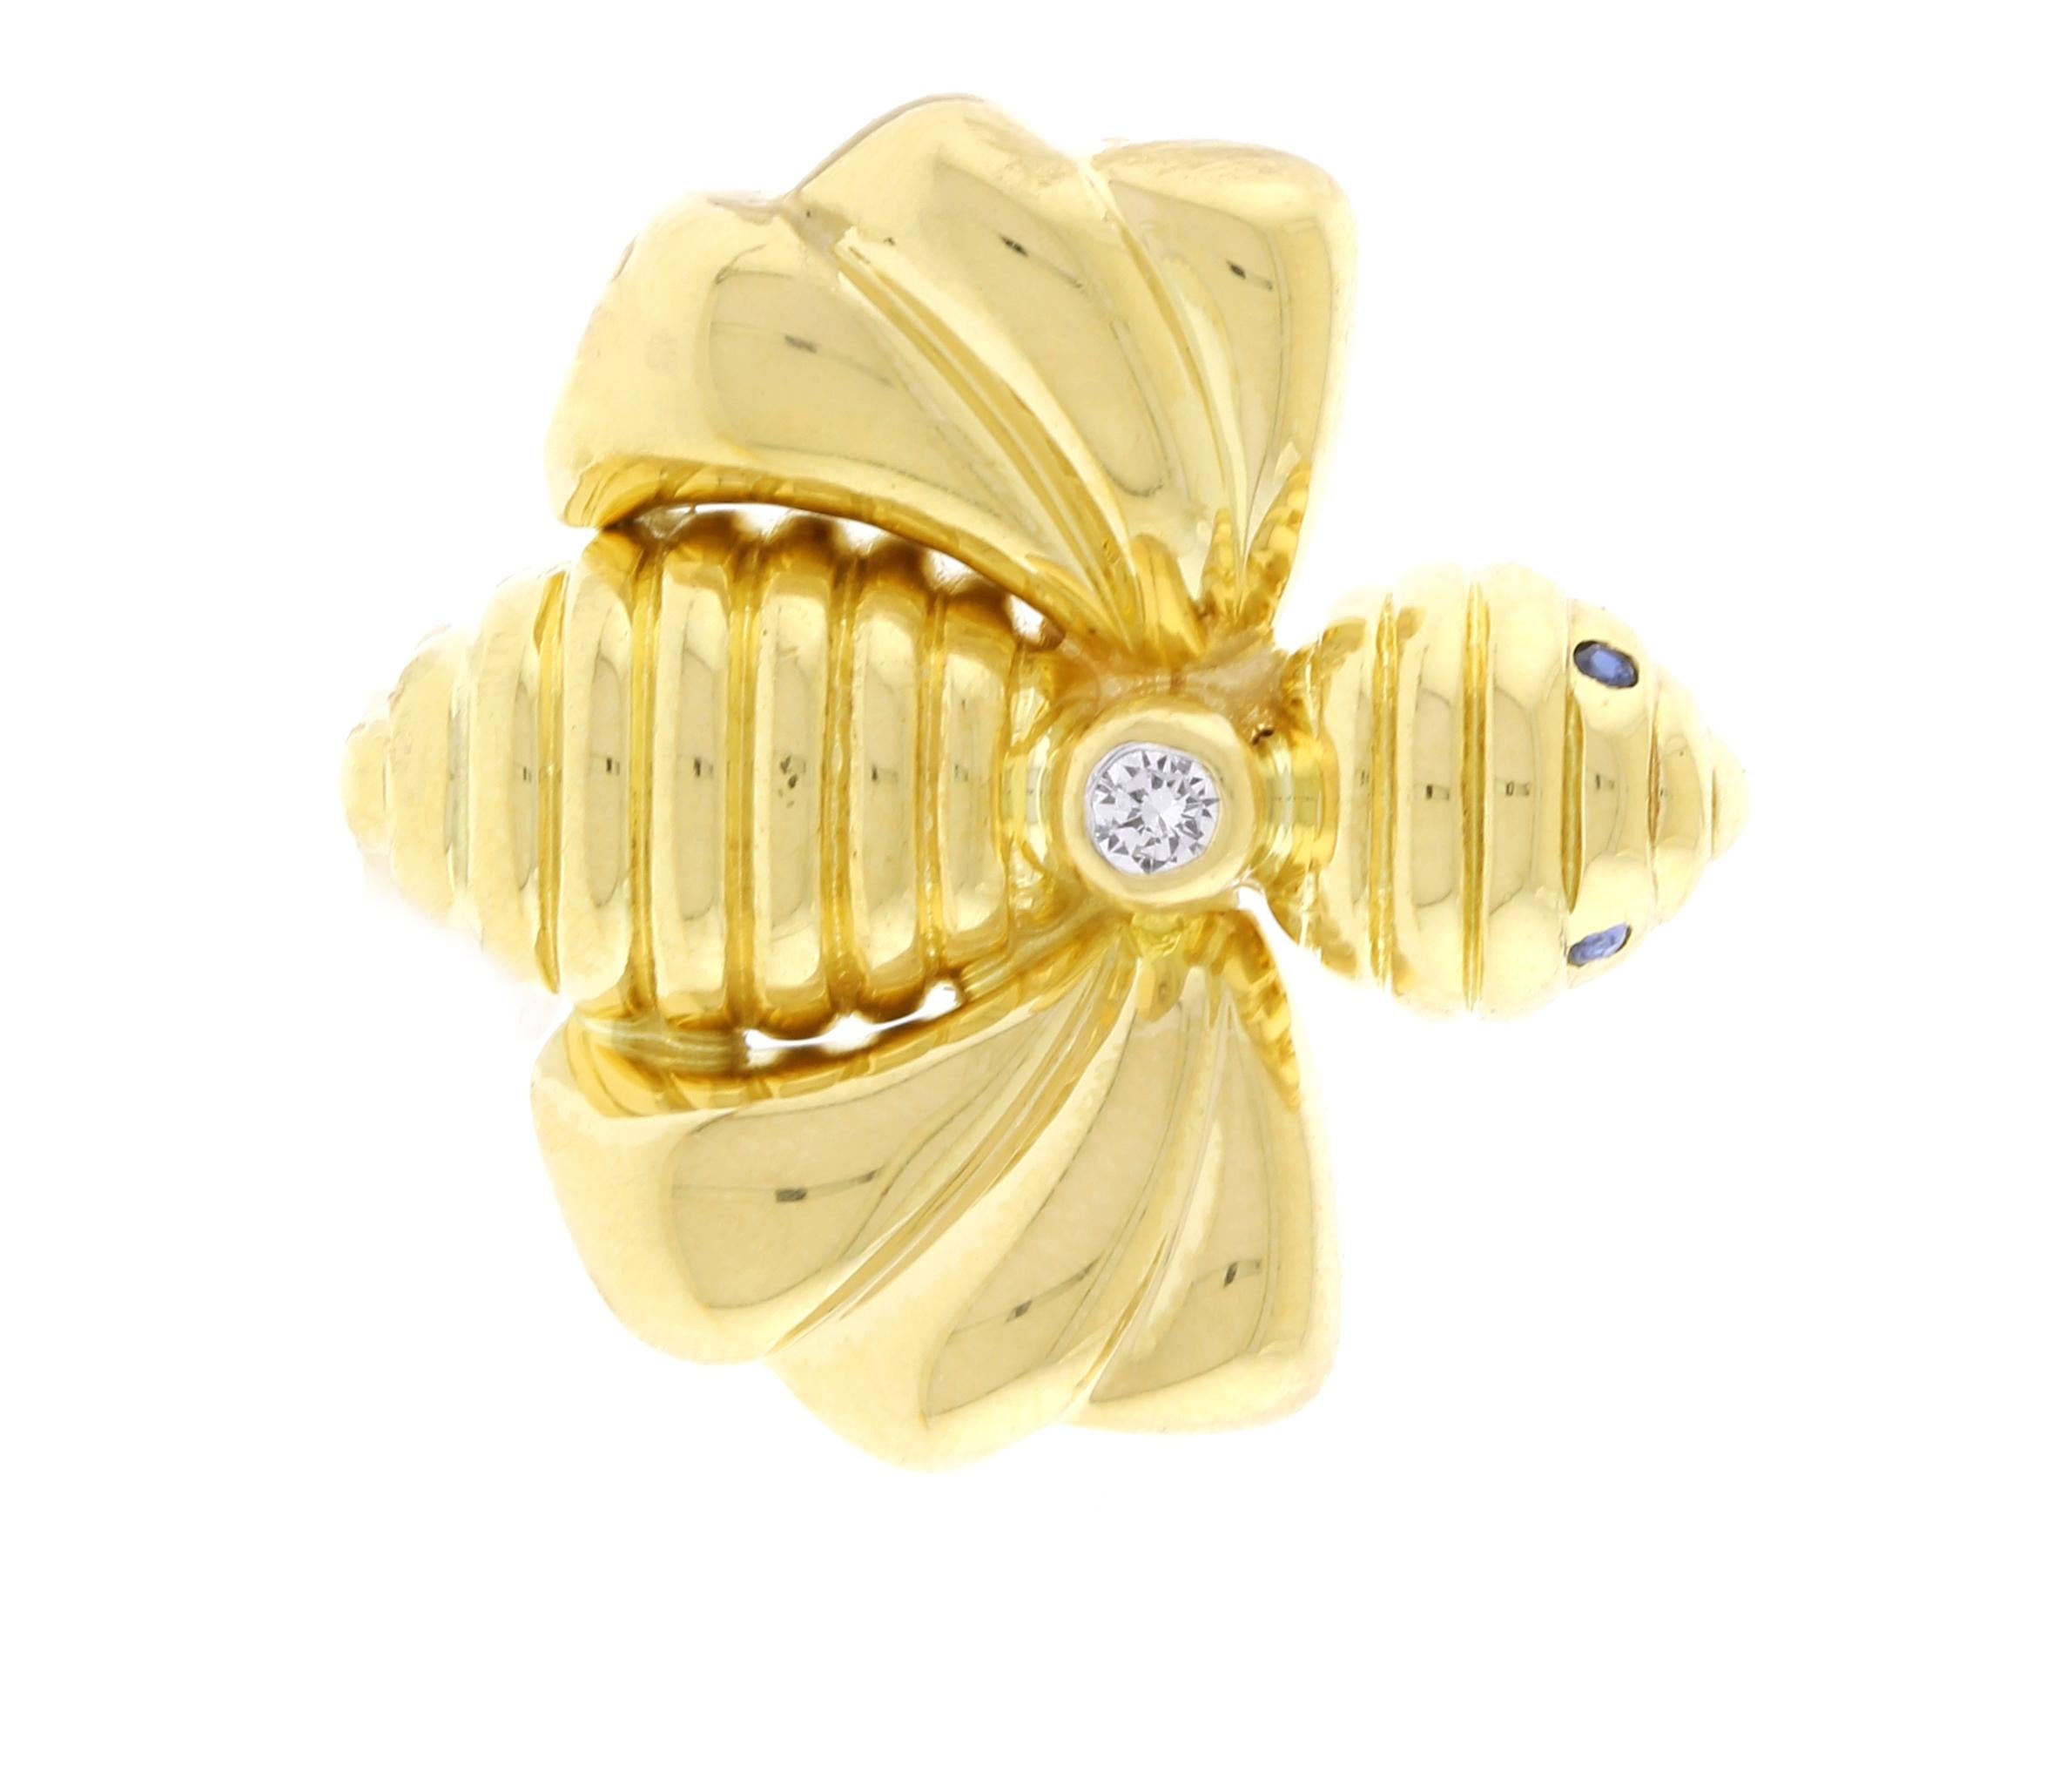 From acclaimed French designer  Chaumet,  a gold bumblebee with sapphire eyes and a singe diamond pin
♦ Designer: Chaumet
♦ Metal: 18 karat
♦ Circa 1990s
♦ 7 /8ths by 5/8ths of an inch
♦ 7 grams
♦ Packaging: Pampillonia presentation box
♦ Condition: